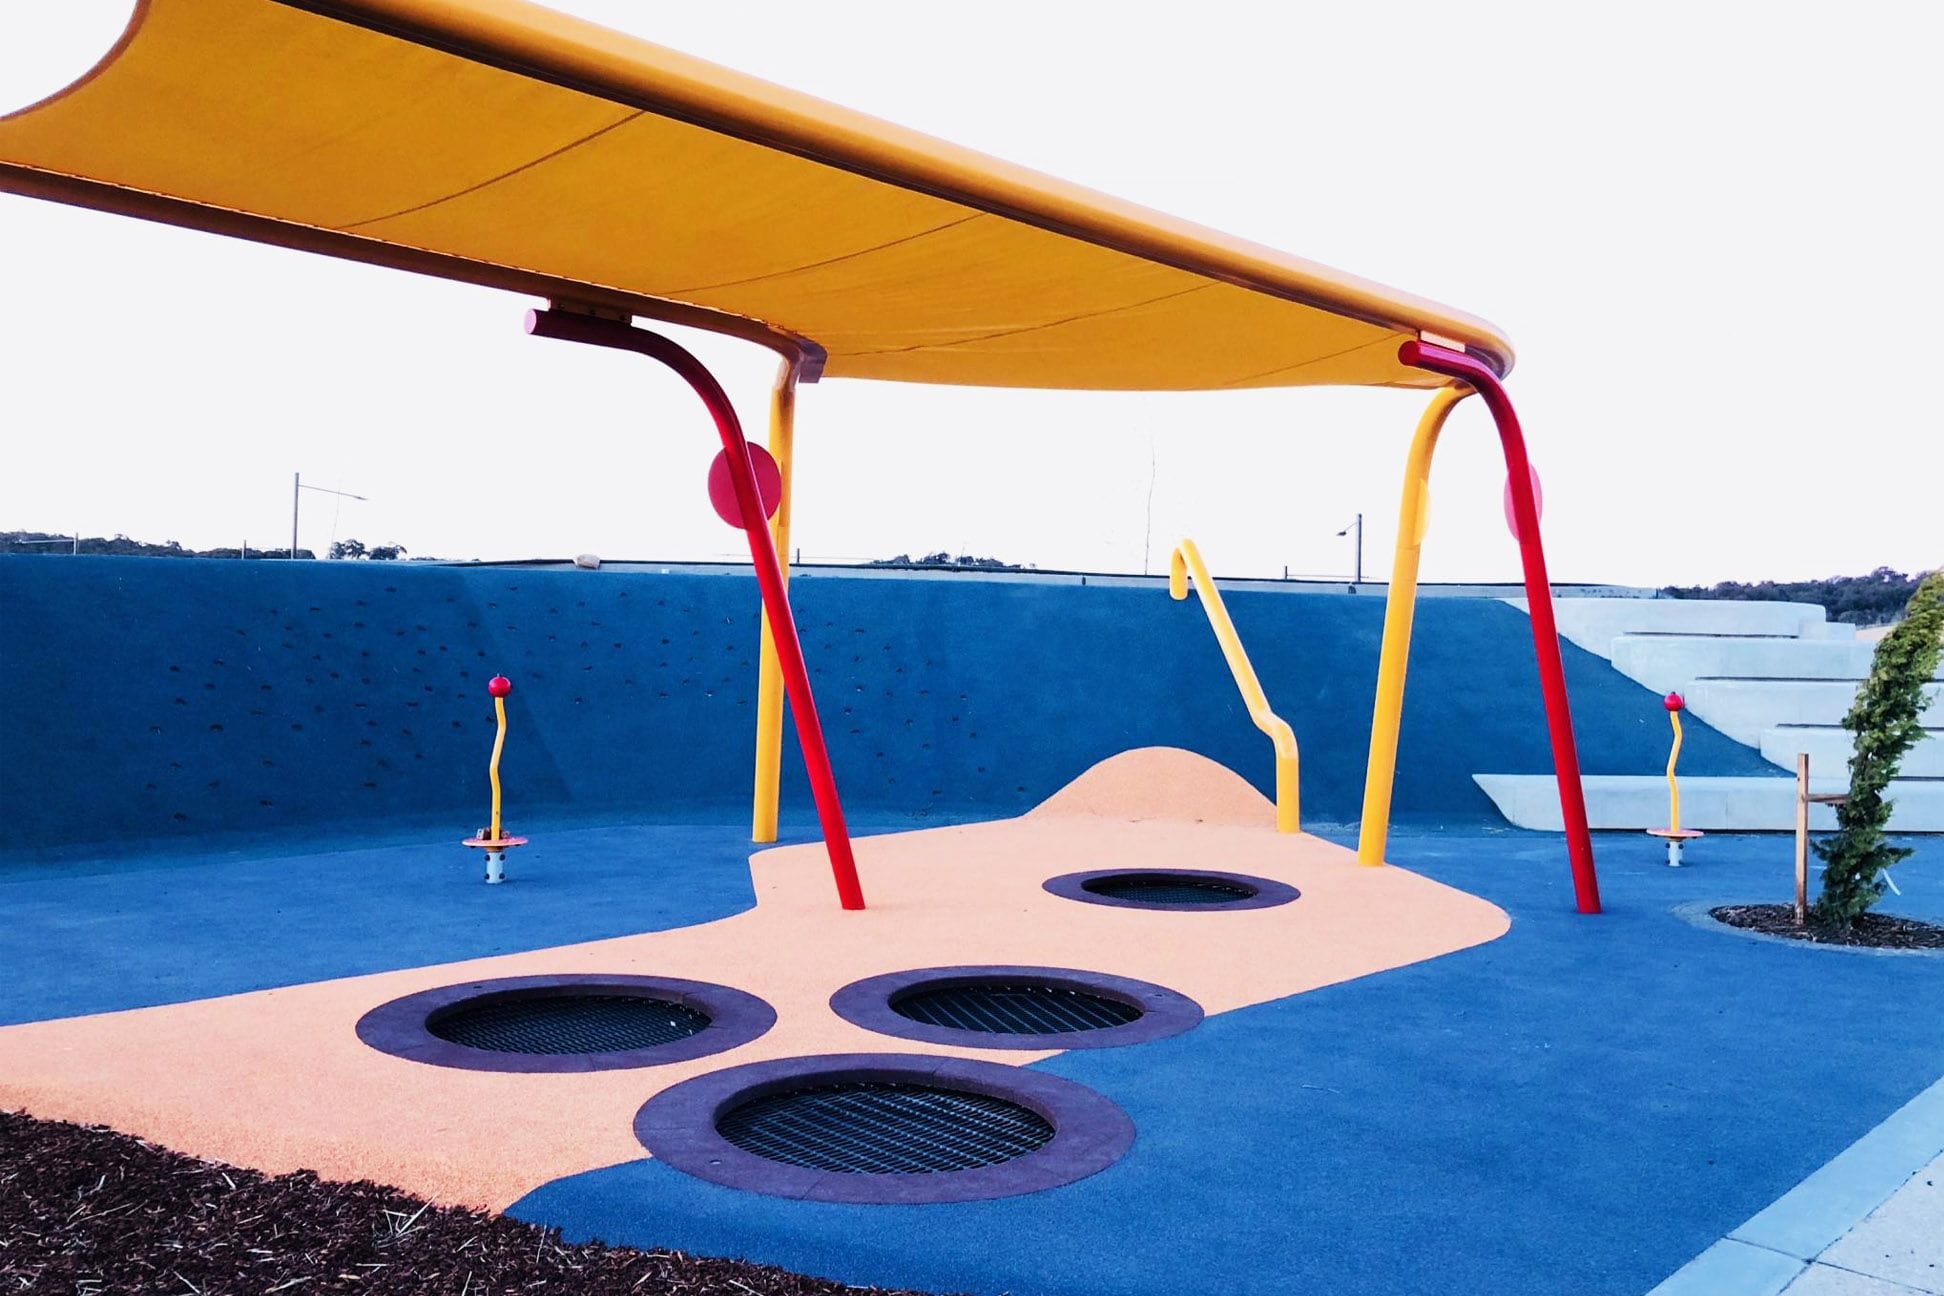 Playground in Taylor, ACT by Bruces Playgrounds Image -5bbc0b5ed8de0